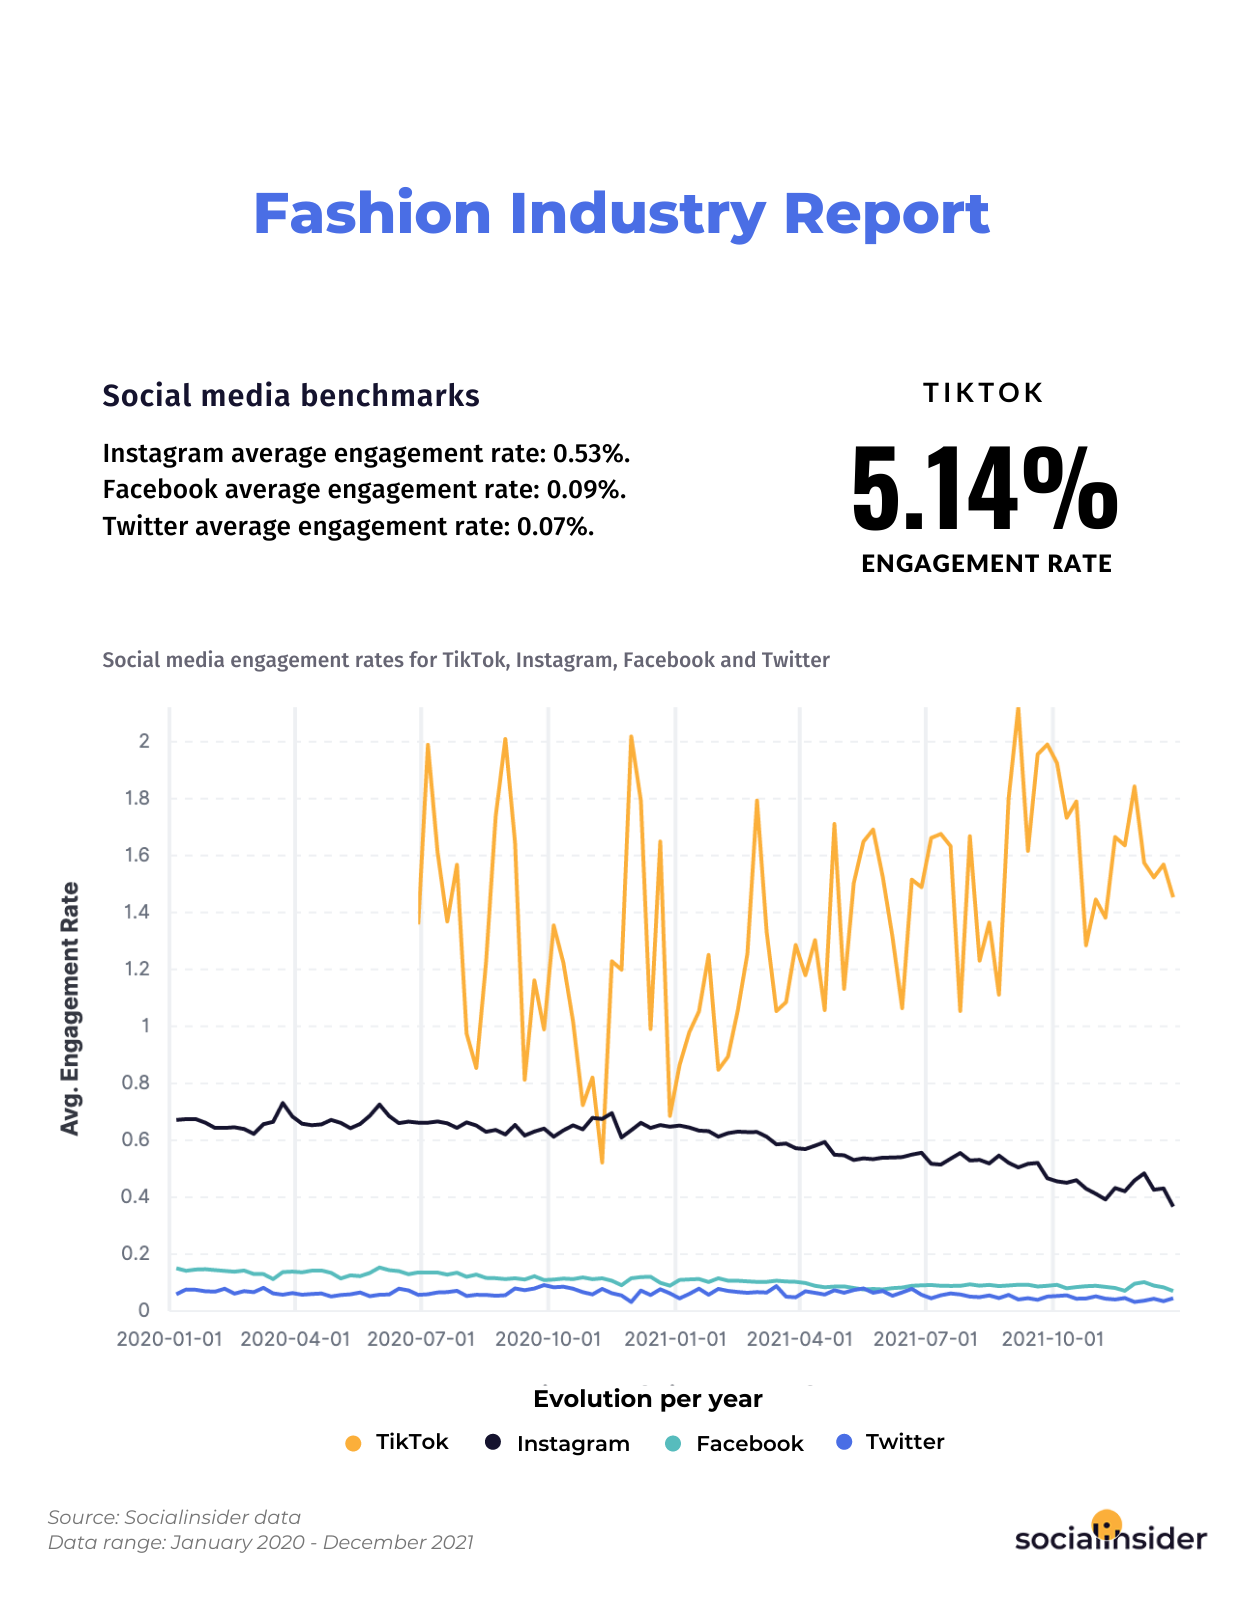 Engagement rates for the fashion industry in 2022